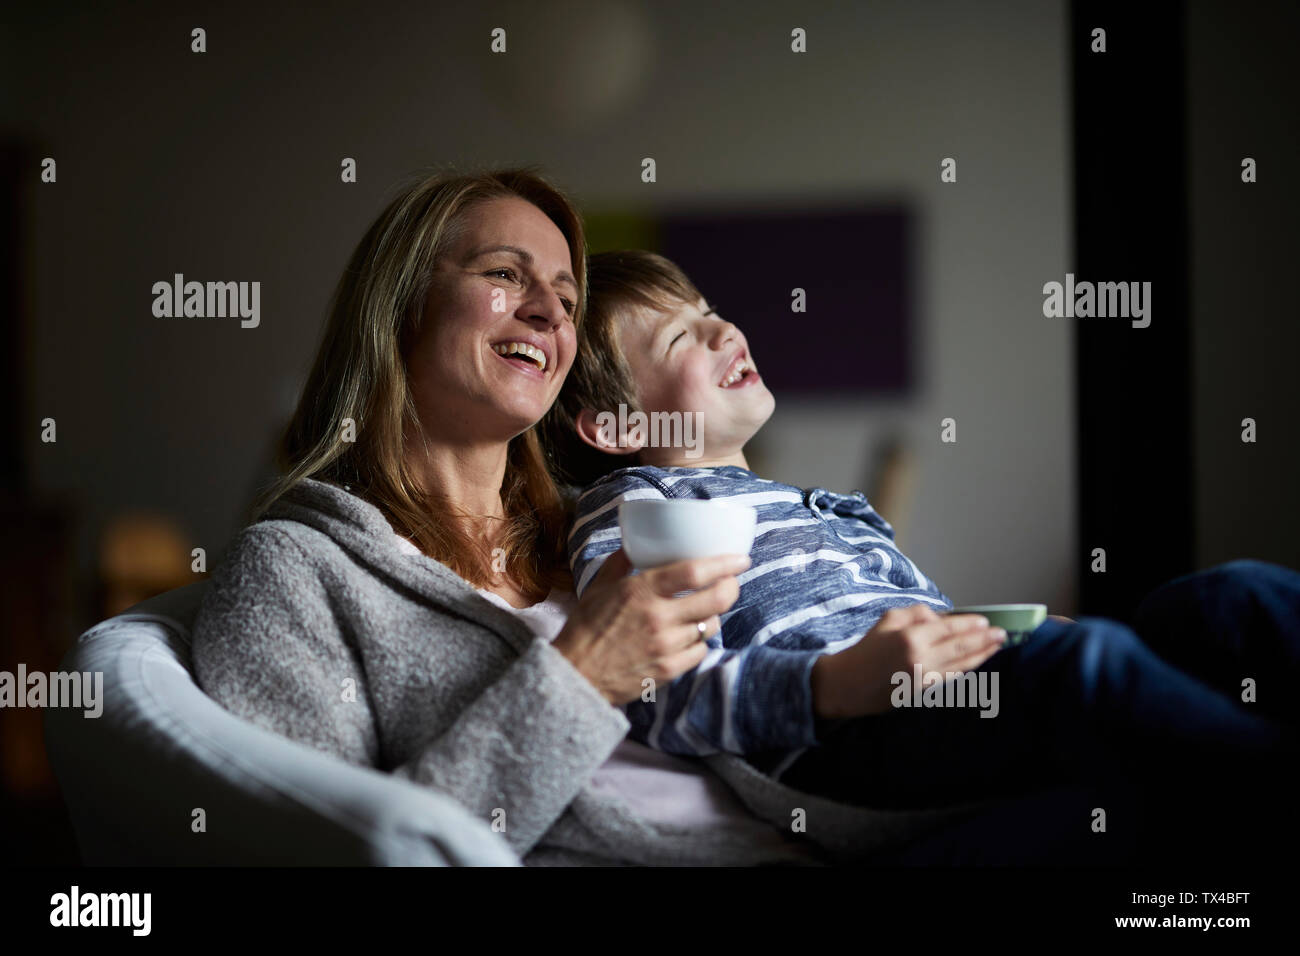 Mother and son sitting in arm cahir, laughing Stock Photo